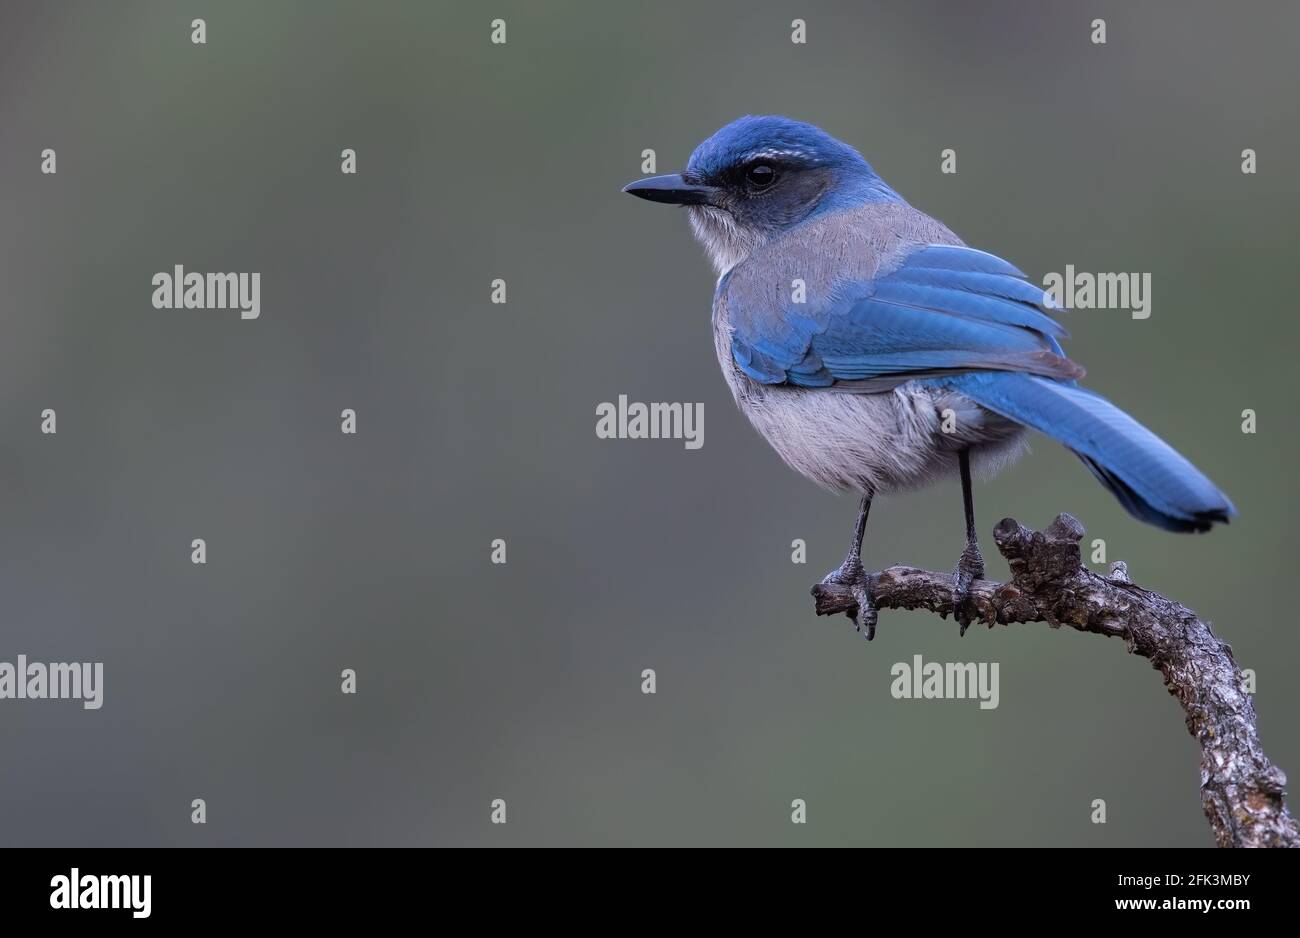 Western Scrub-Jay (Aphelocoma californica) adult perched on a branch Stock Photo